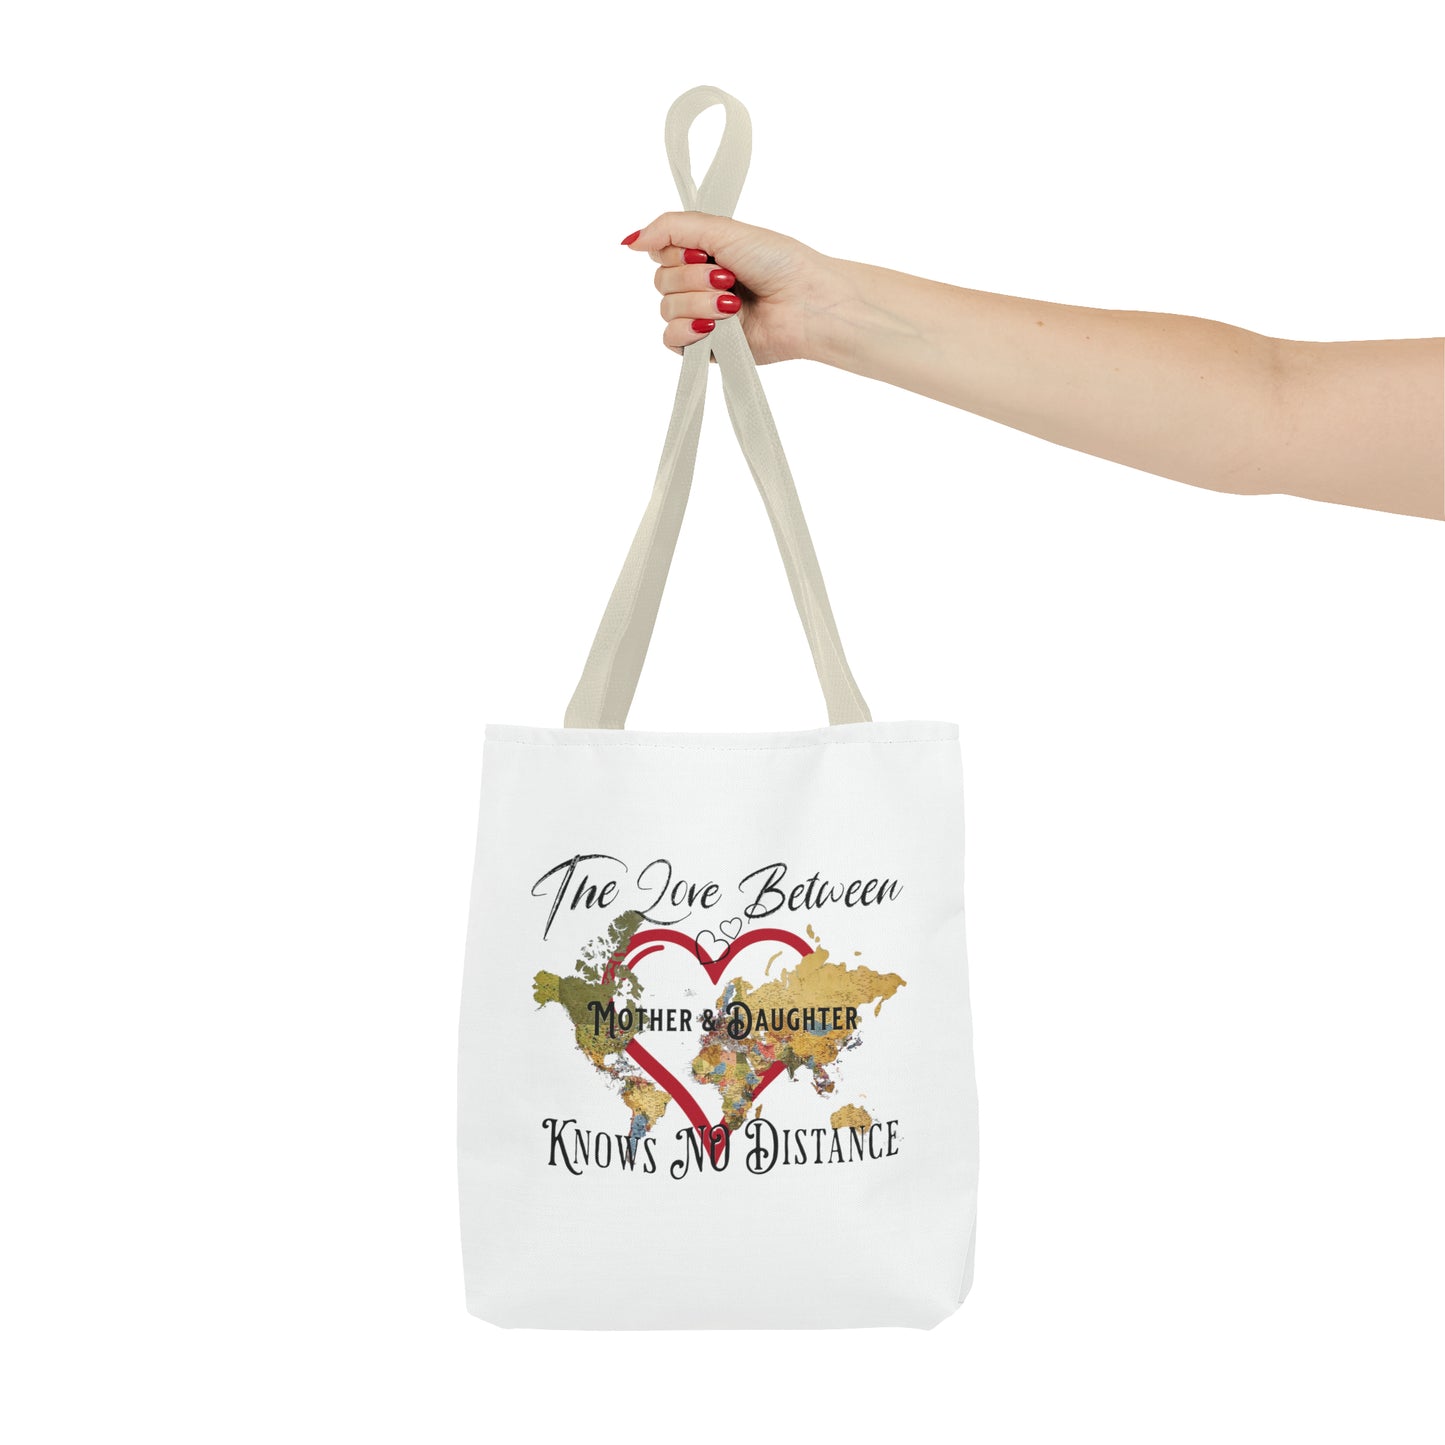 The love between mother and daughter knows no distance - Tote Bag (AOP)